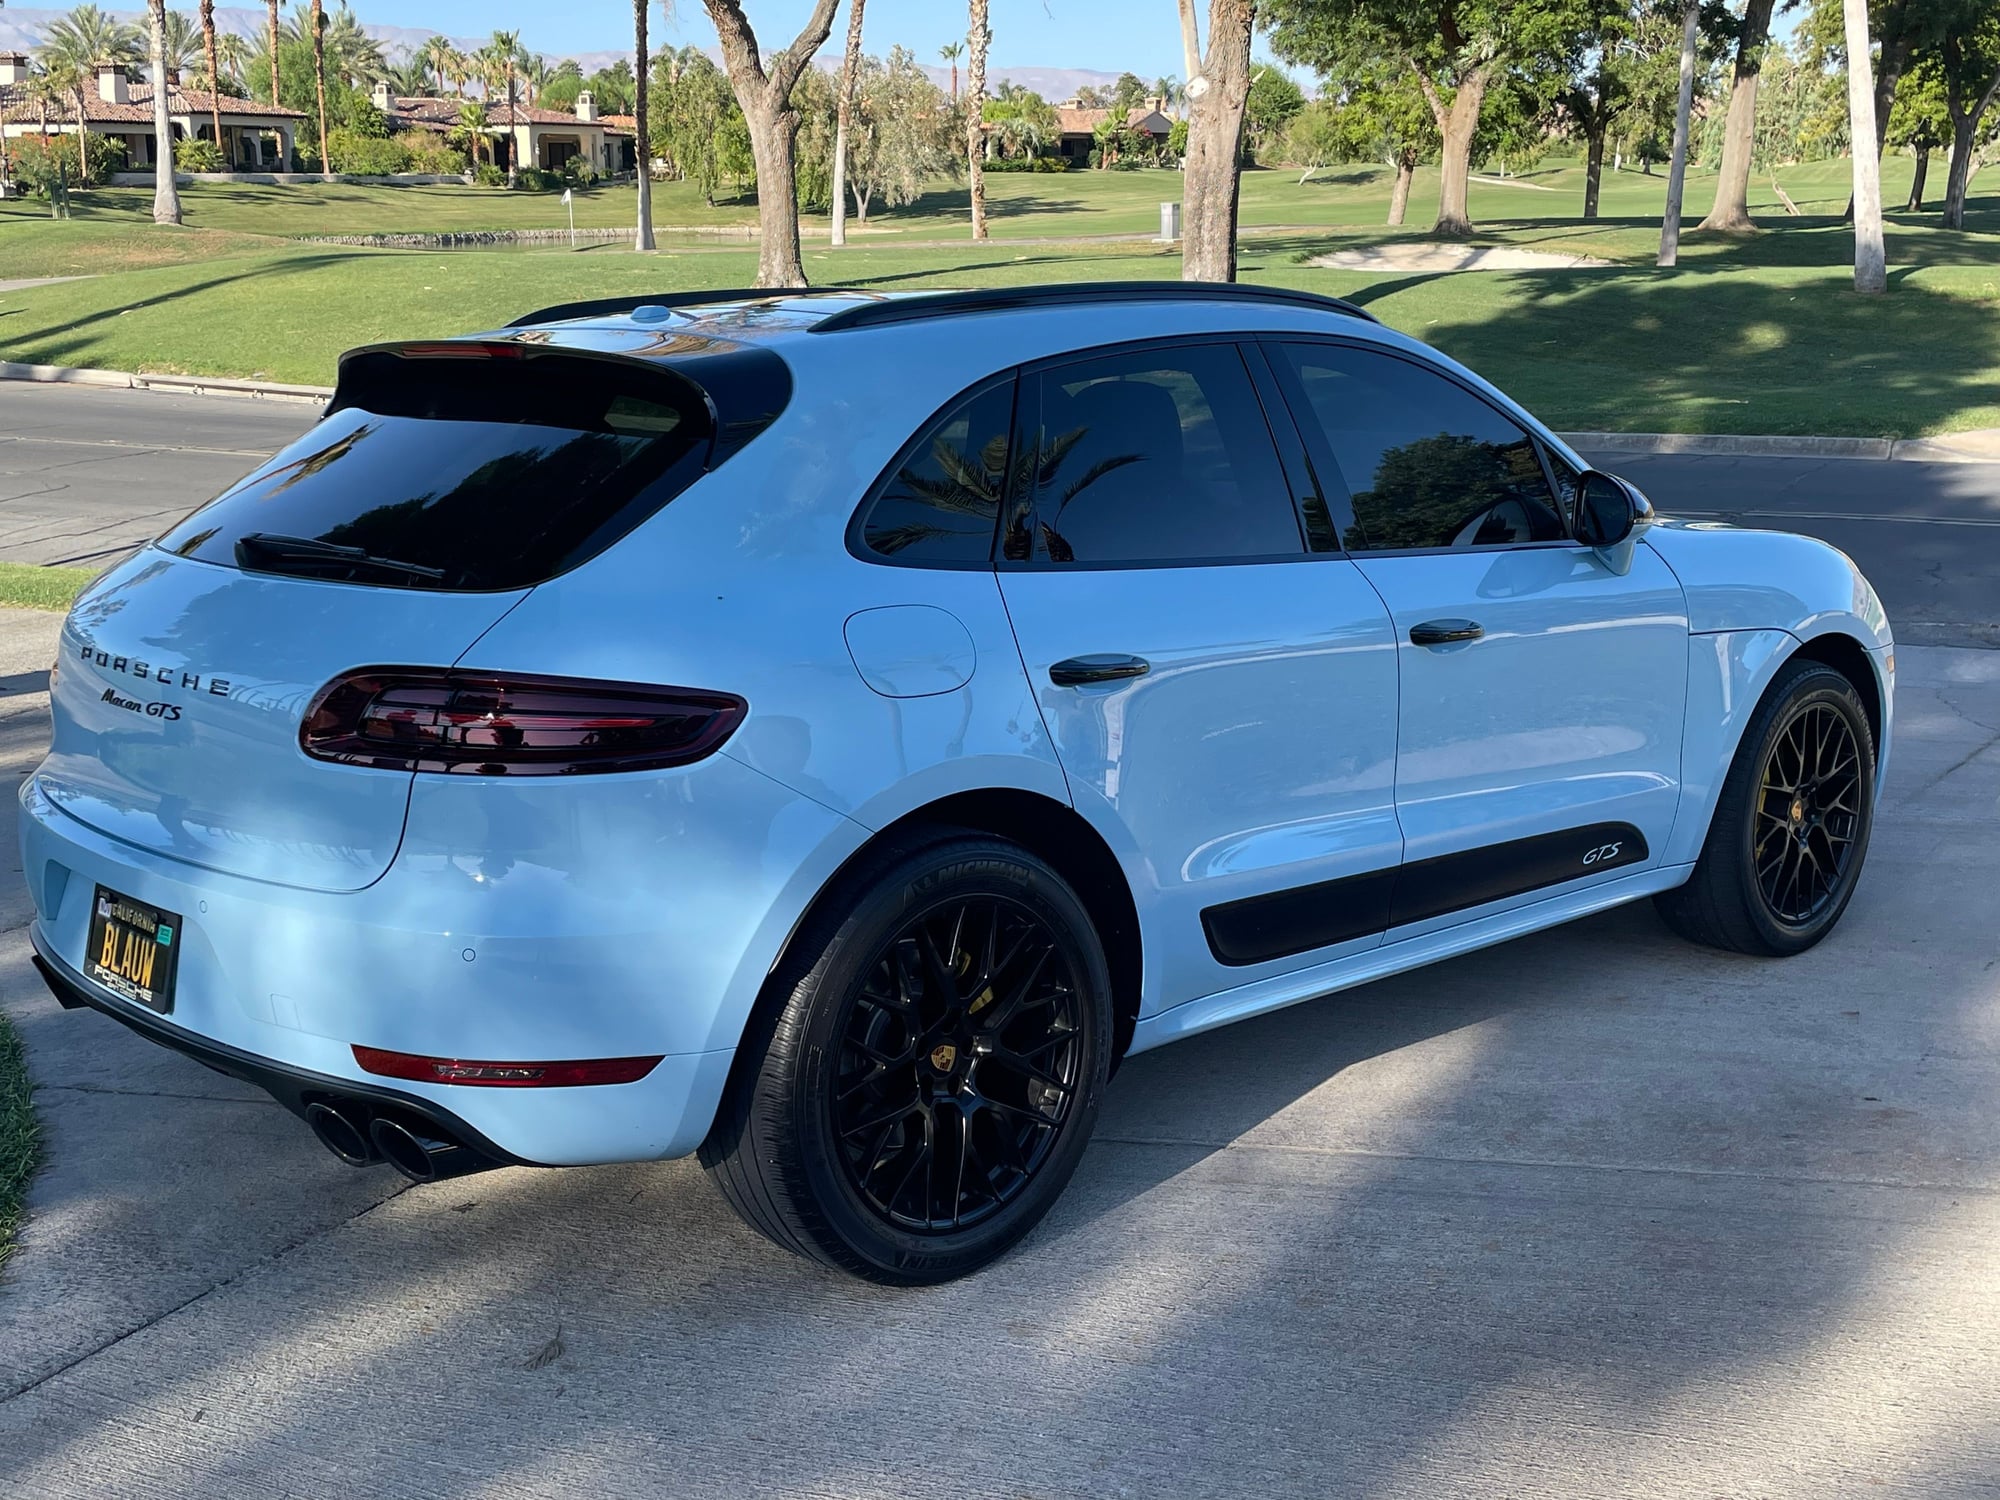 2018 Porsche Macan - 2018 Macan GTS in PTS Gulf Blue - Used - VIN WP1AG2A52JLB61213 - 34,500 Miles - 6 cyl - AWD - Automatic - SUV - Blue - Indian Wells, CA 92110, United States